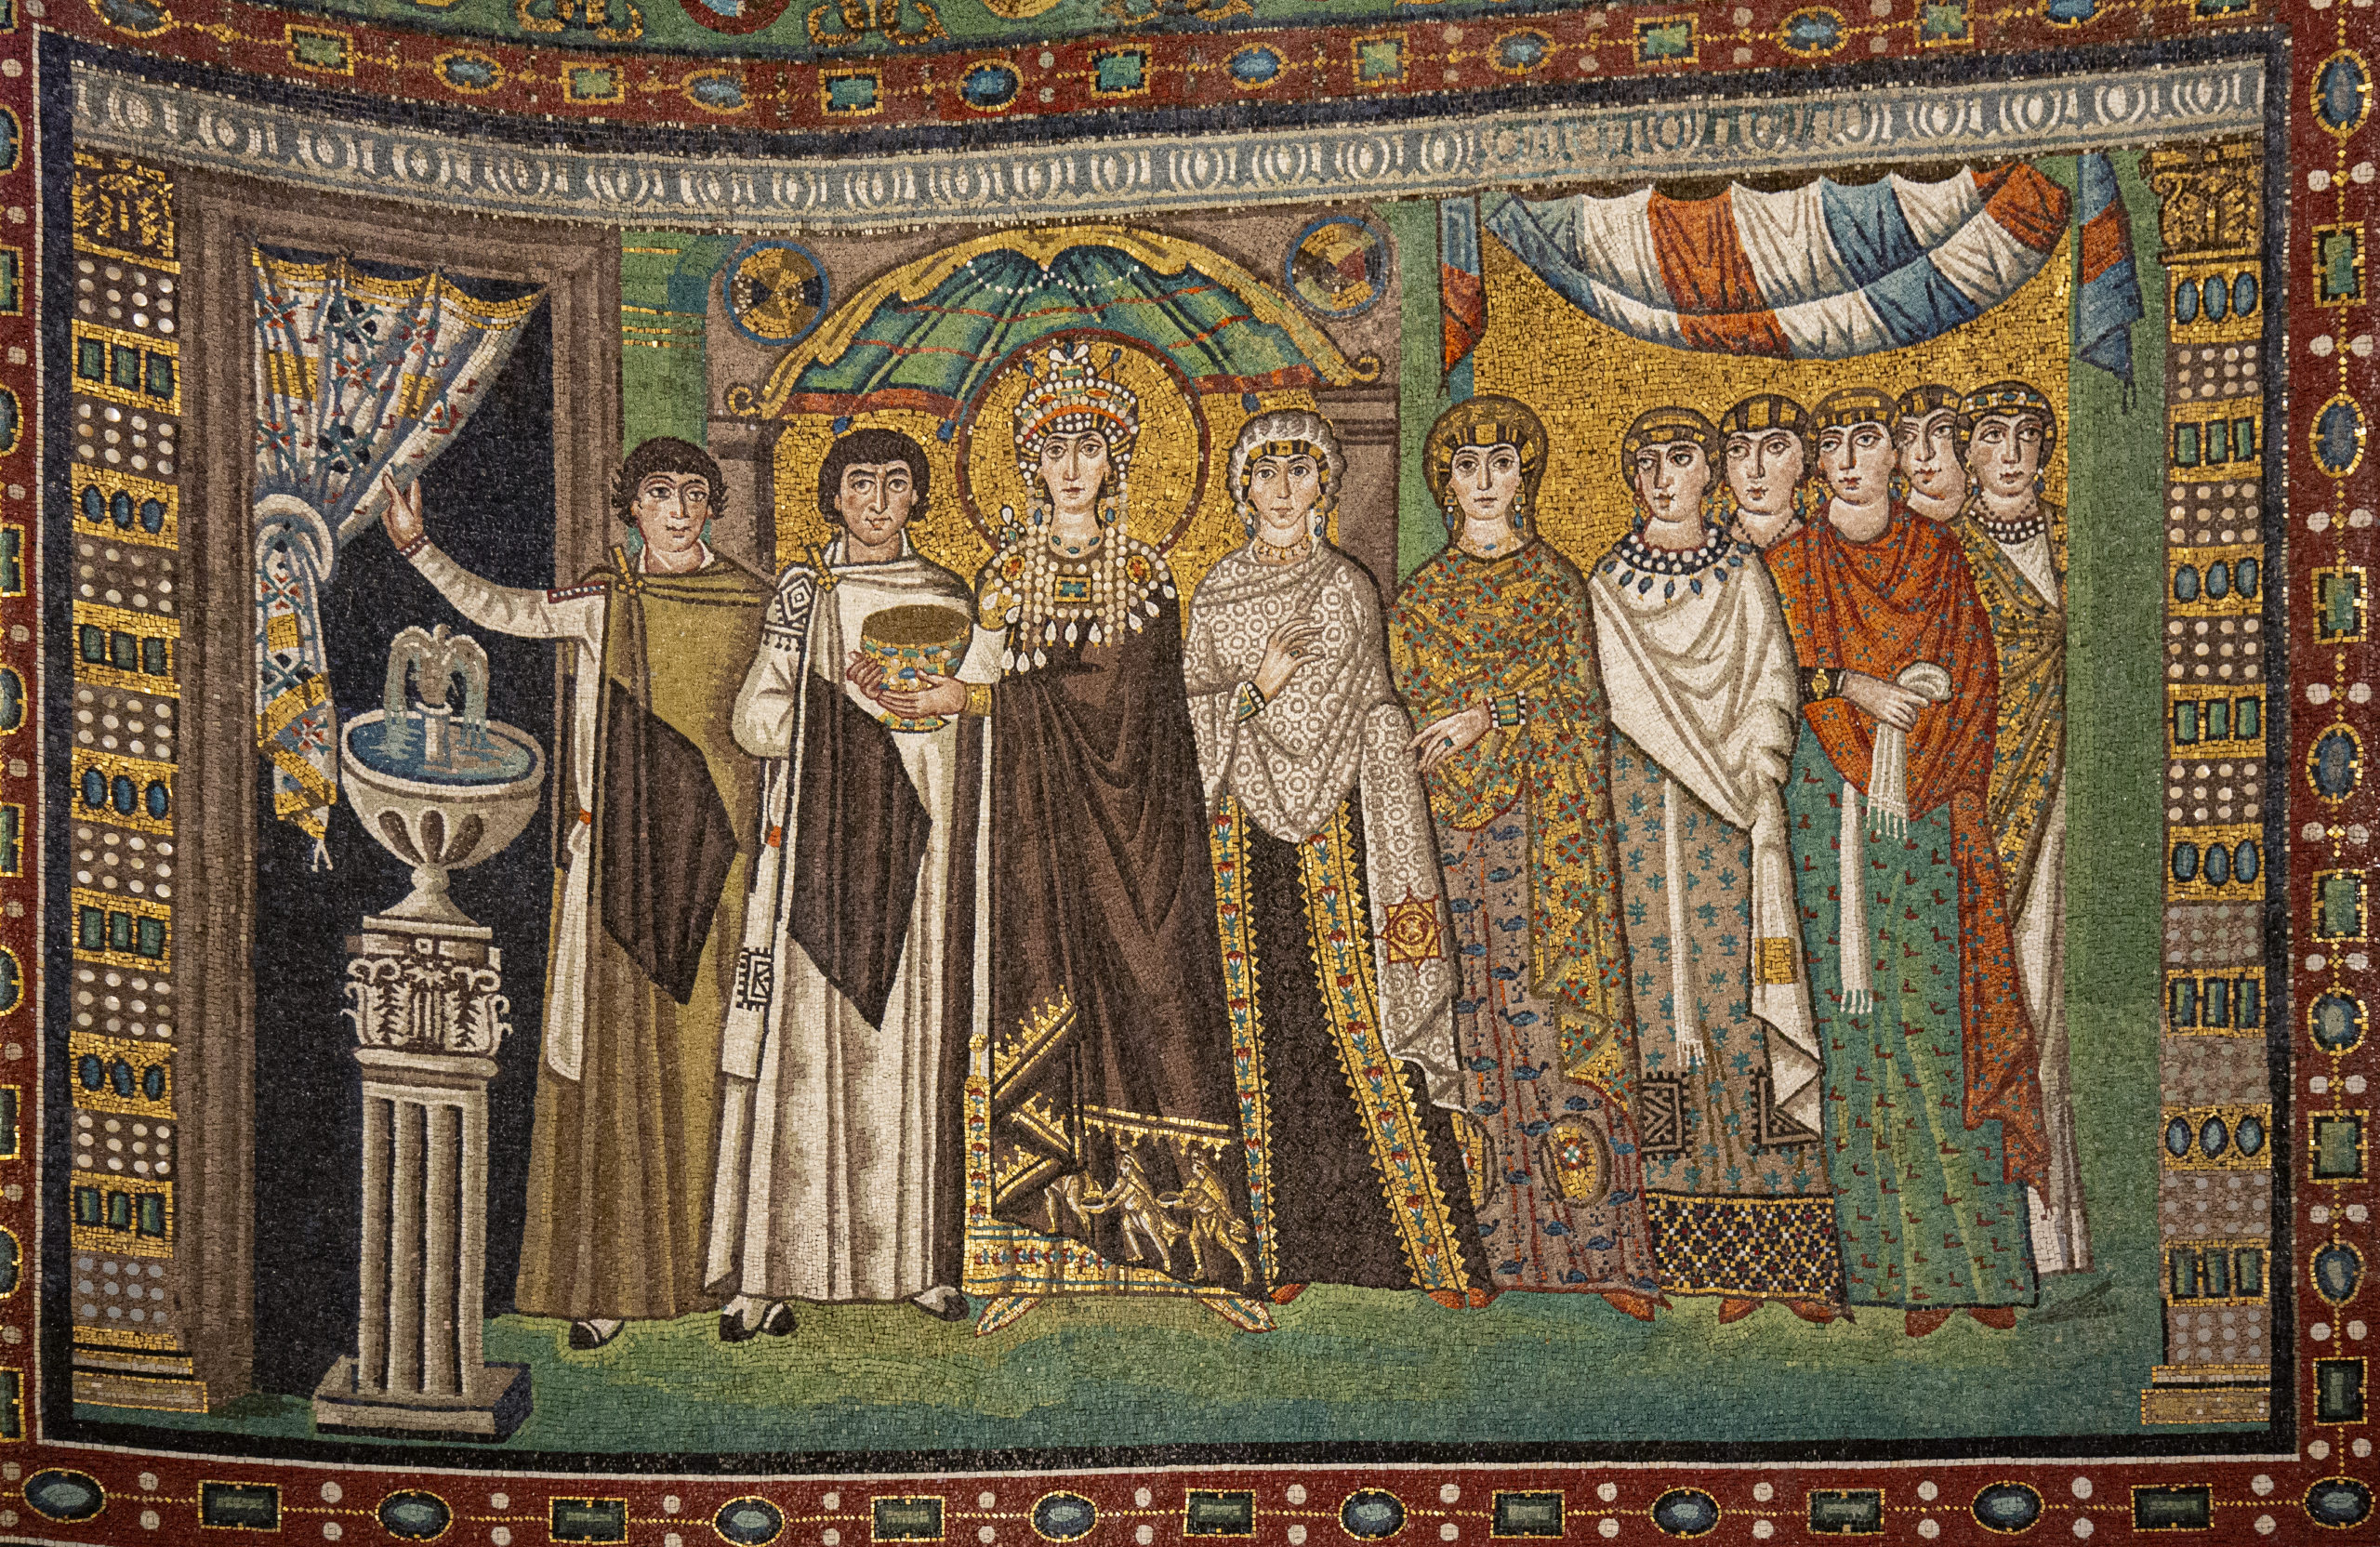 Detail of the wall mosaic depicting the attendants of empress Theodora’s wearing luxury silk garments of diverse designs, 540s, San Vitale, Ravenna (photo: byzantologist, CC BY-NC-SA 2.0)